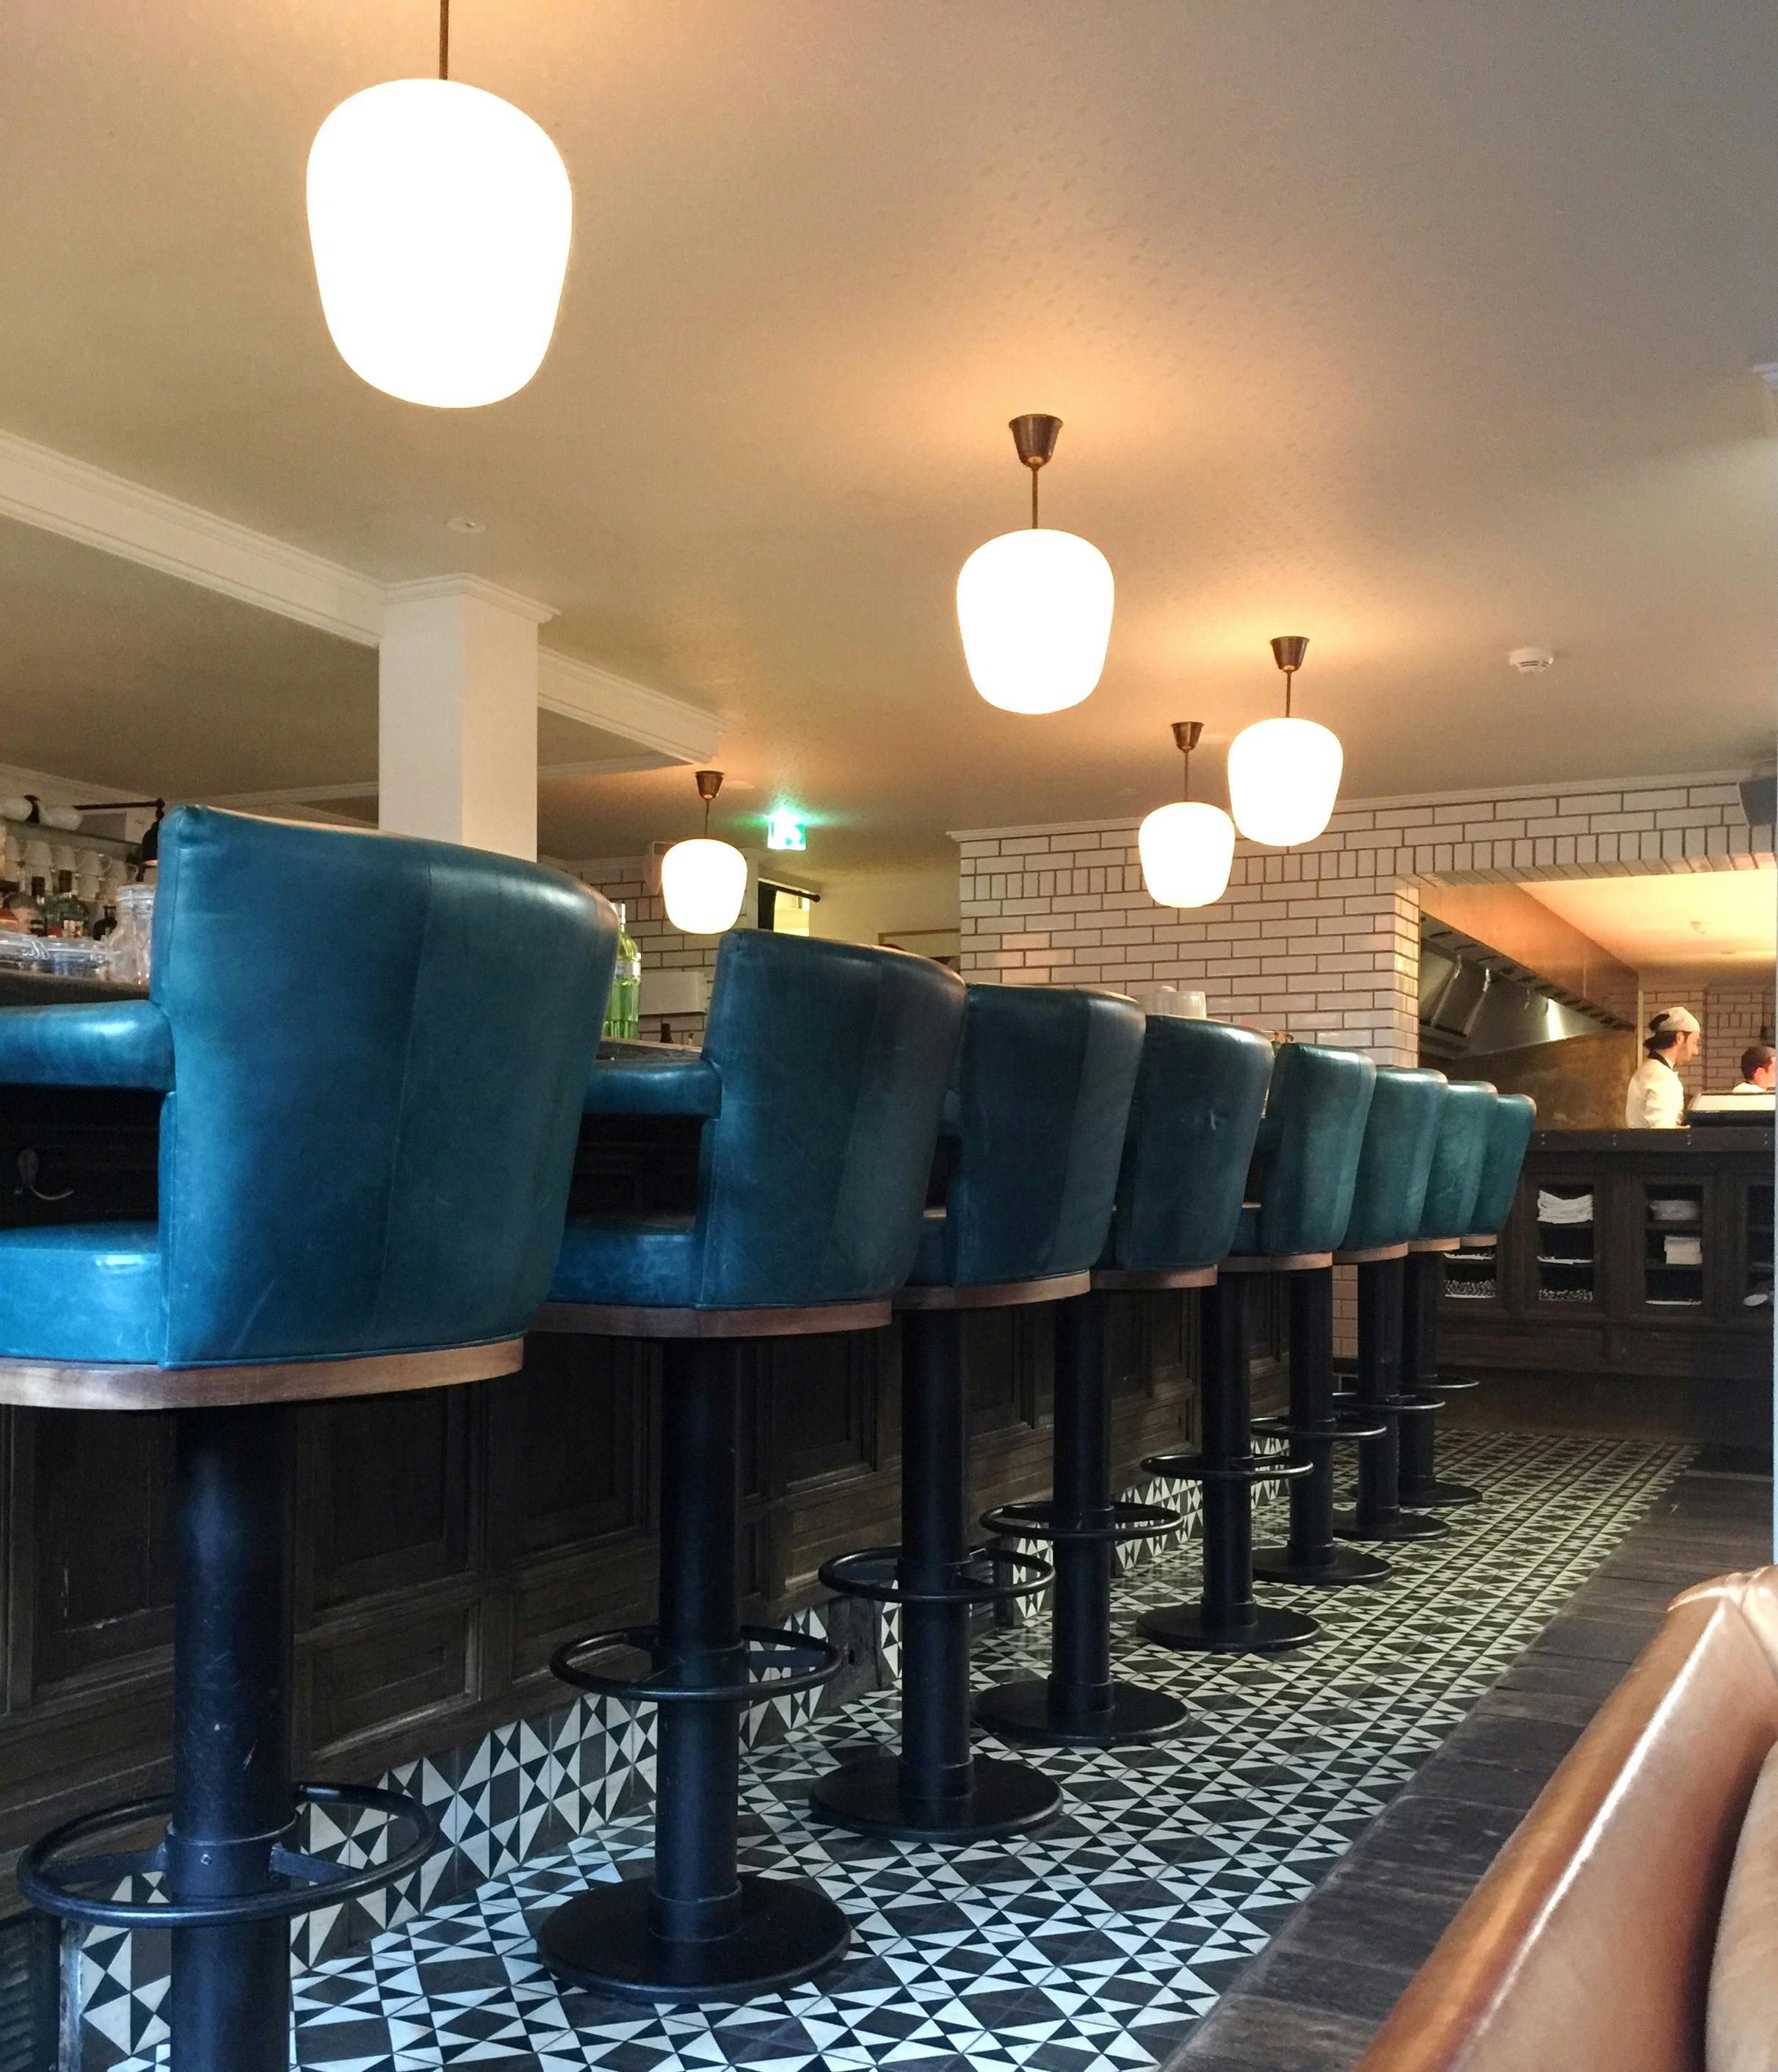 Free stock photo of bar cafe, blue stools, diner